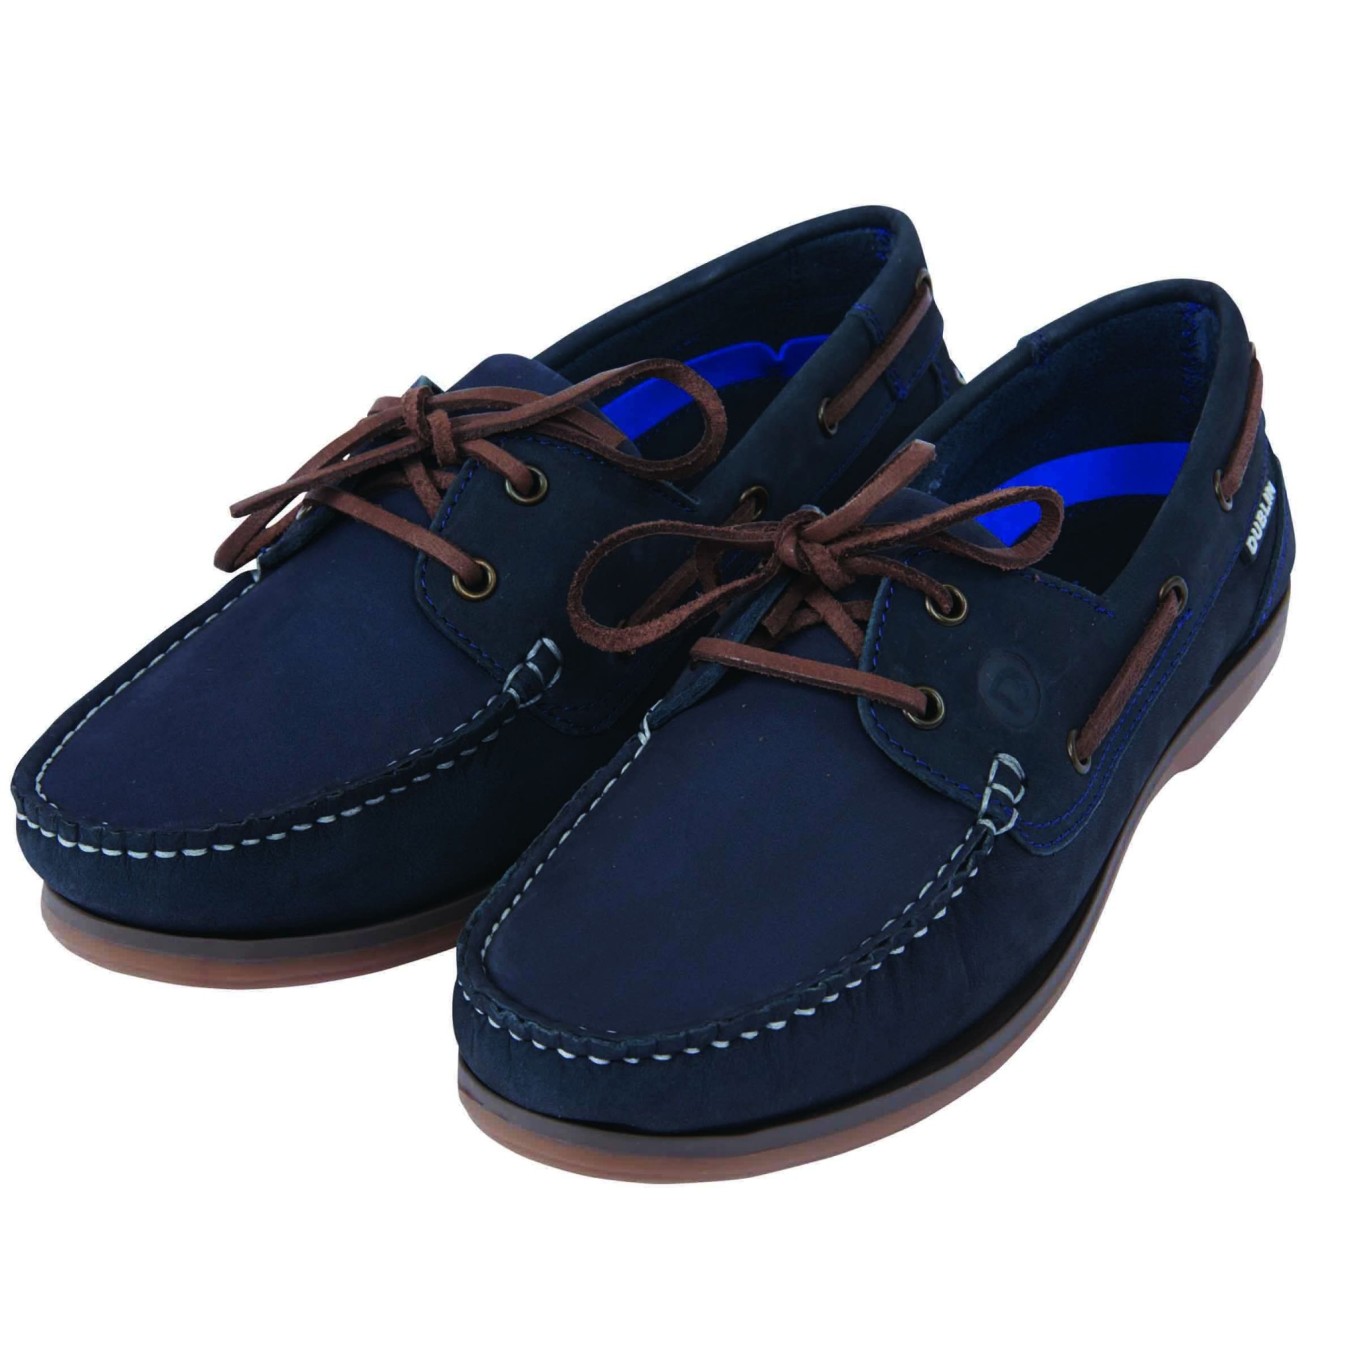 The Dublin Broadfield Arena Shoes are designed to offer extreme comfor..